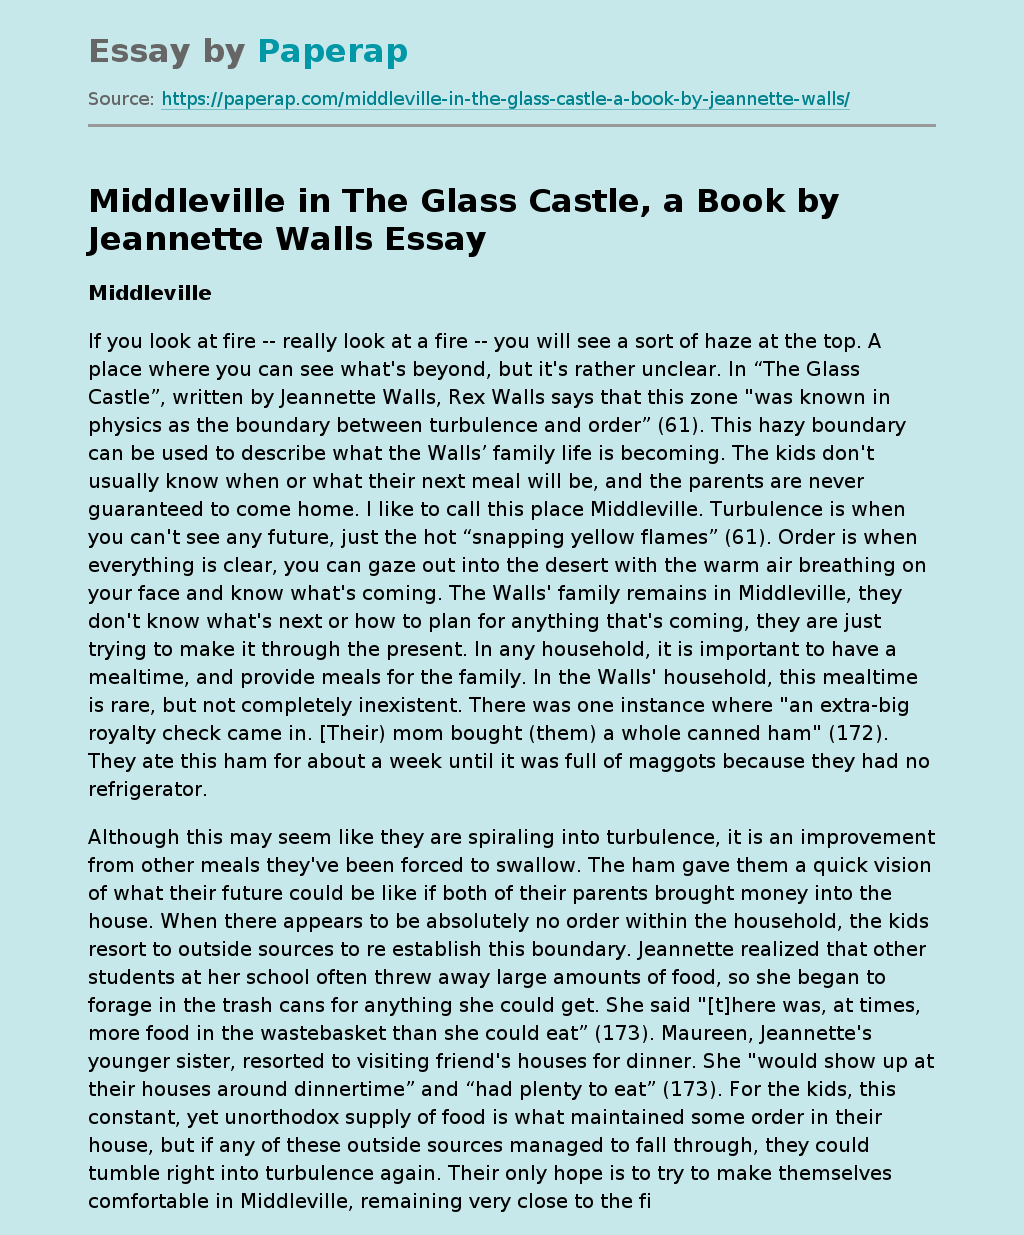 Middleville in The Glass Castle, a Book by Jeannette Walls